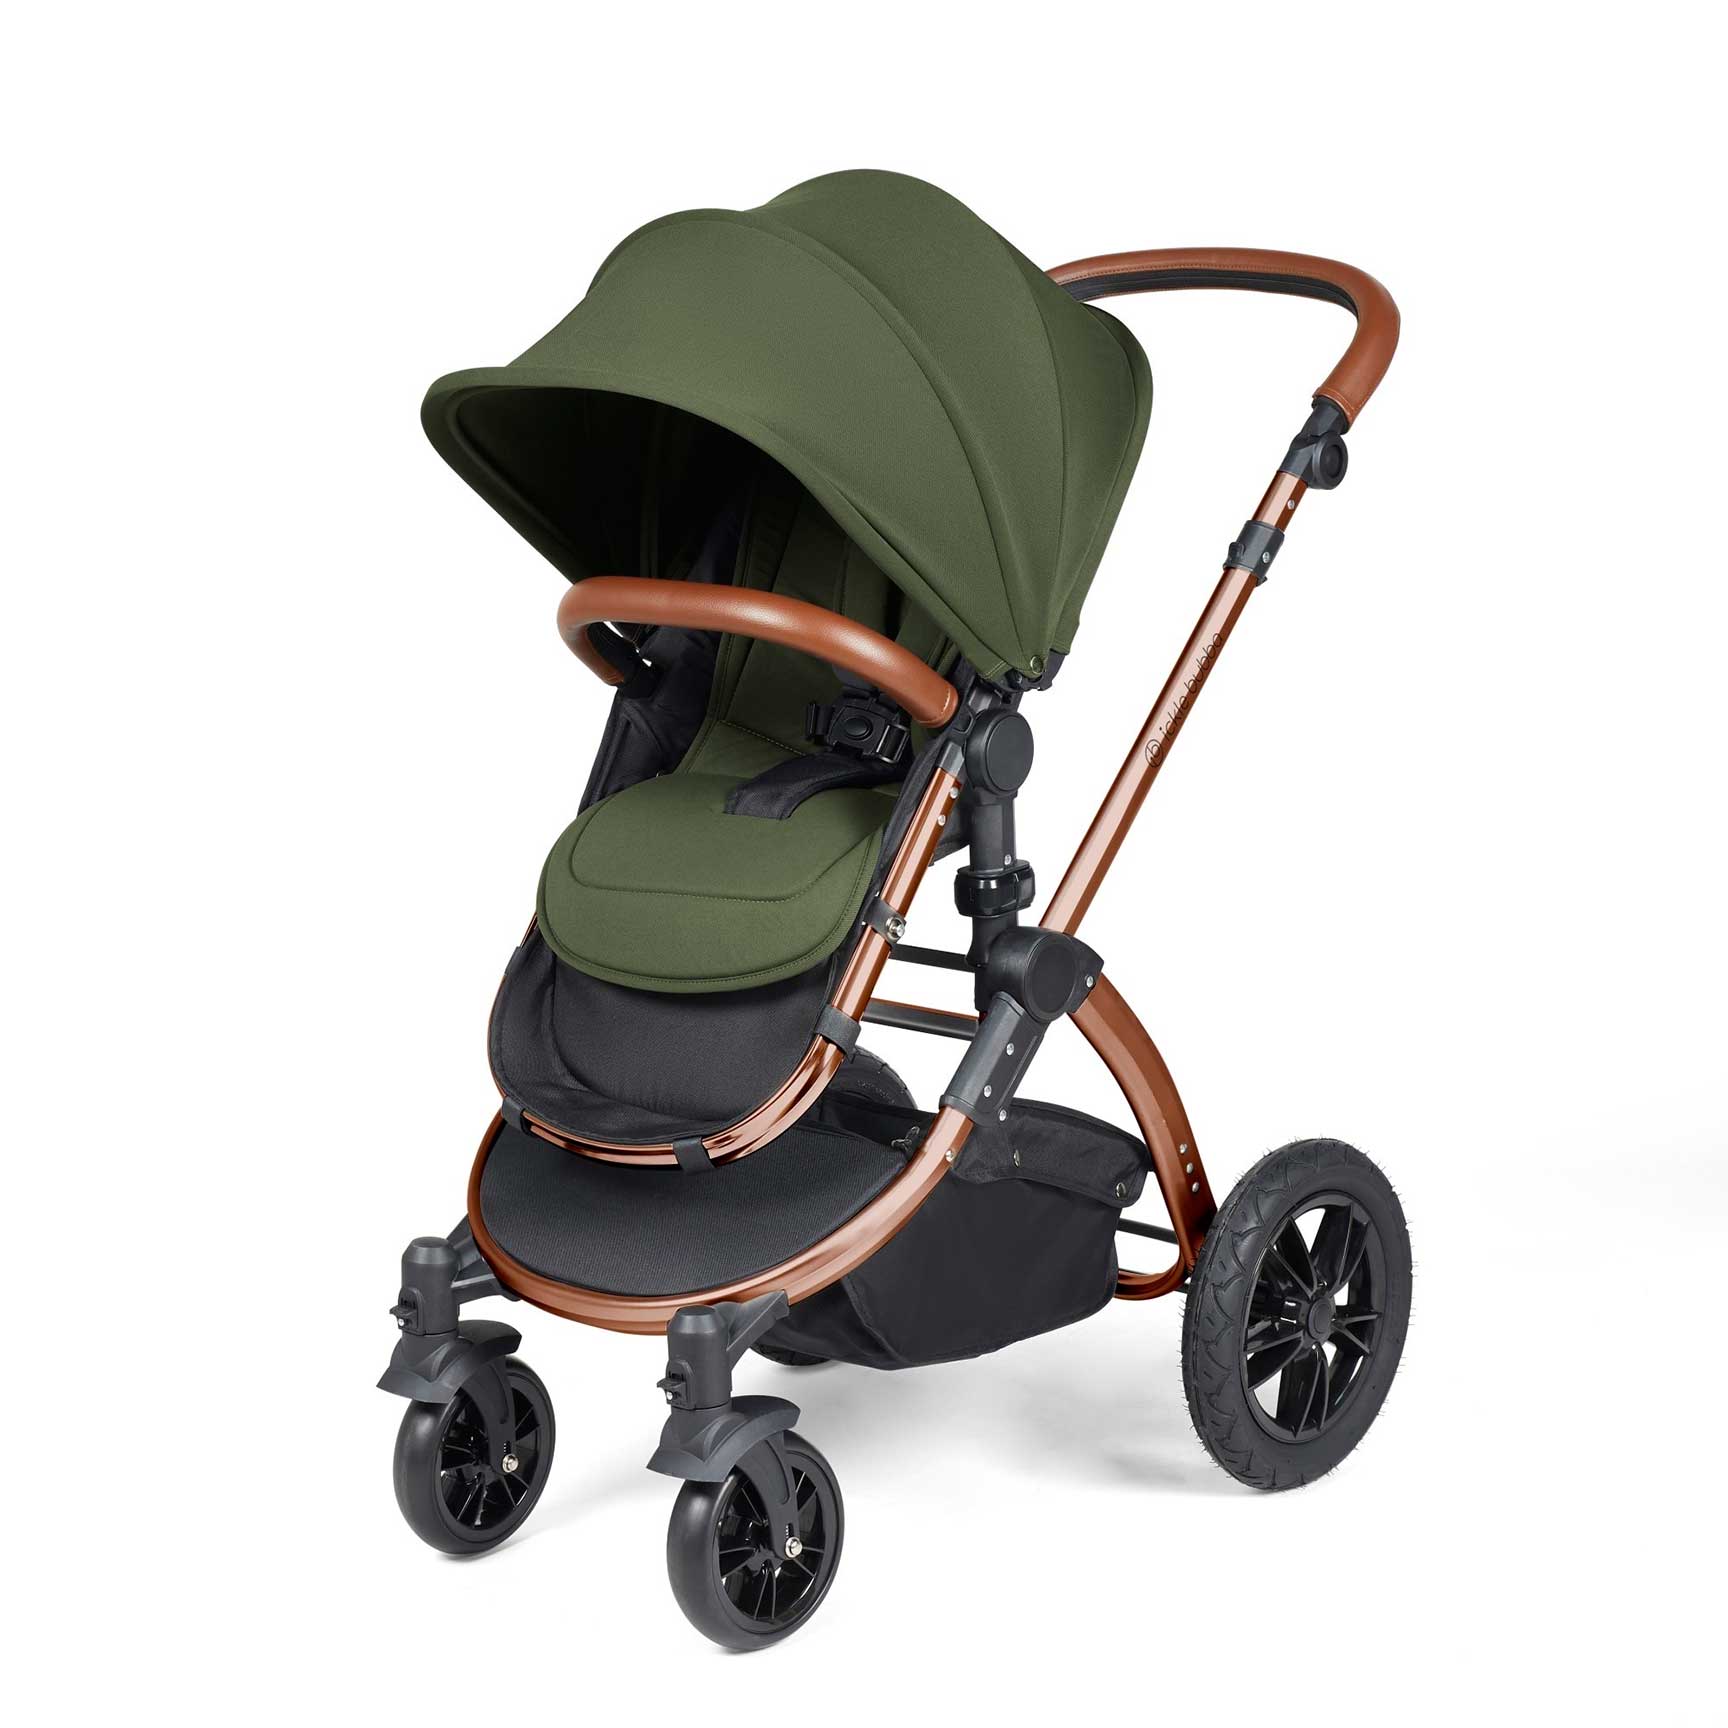 Ickle Bubba Stomp Luxe All-in-One Travel System with Isofix Base in Bronze/Woodland/Tan Travel Systems 10-011-300-022 5056515026627